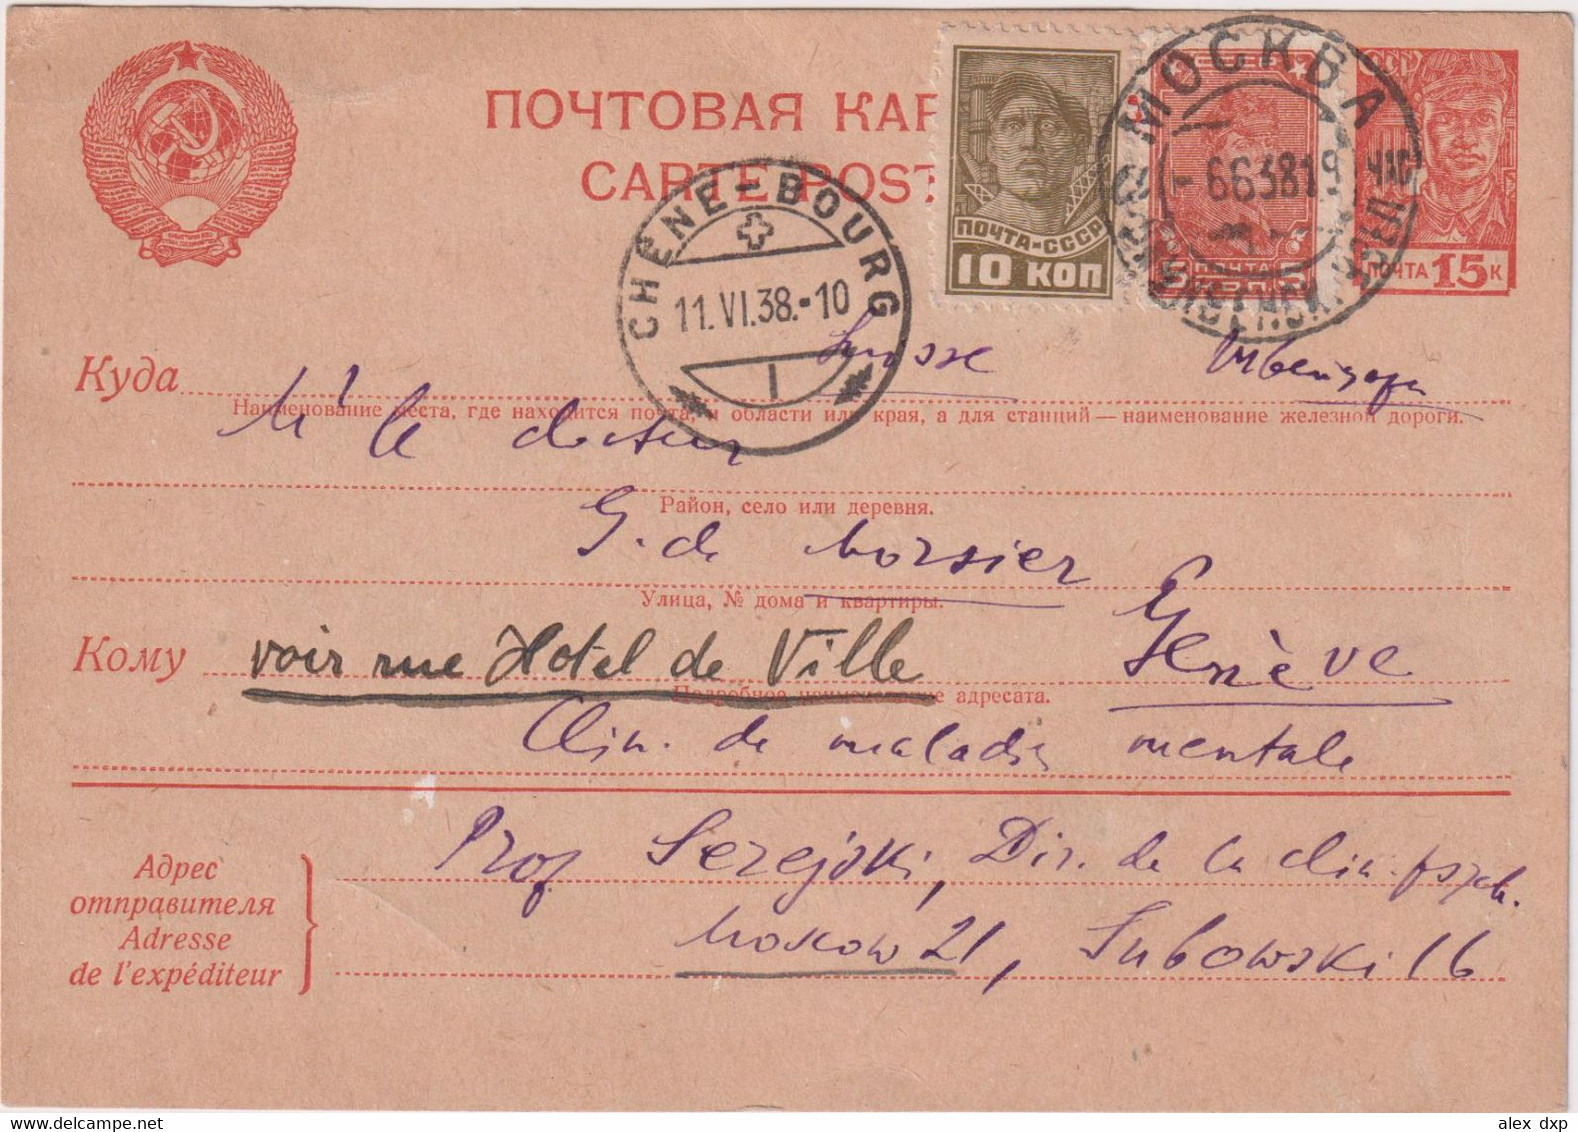 RUSSIA (USSR) > 1938 POSTAL HISTORY > POSTAL STATIONARY CARD (W/2 ADDED STAMPS) FROM MOSCOW TO GENEVE. SWITZERLAND - Briefe U. Dokumente